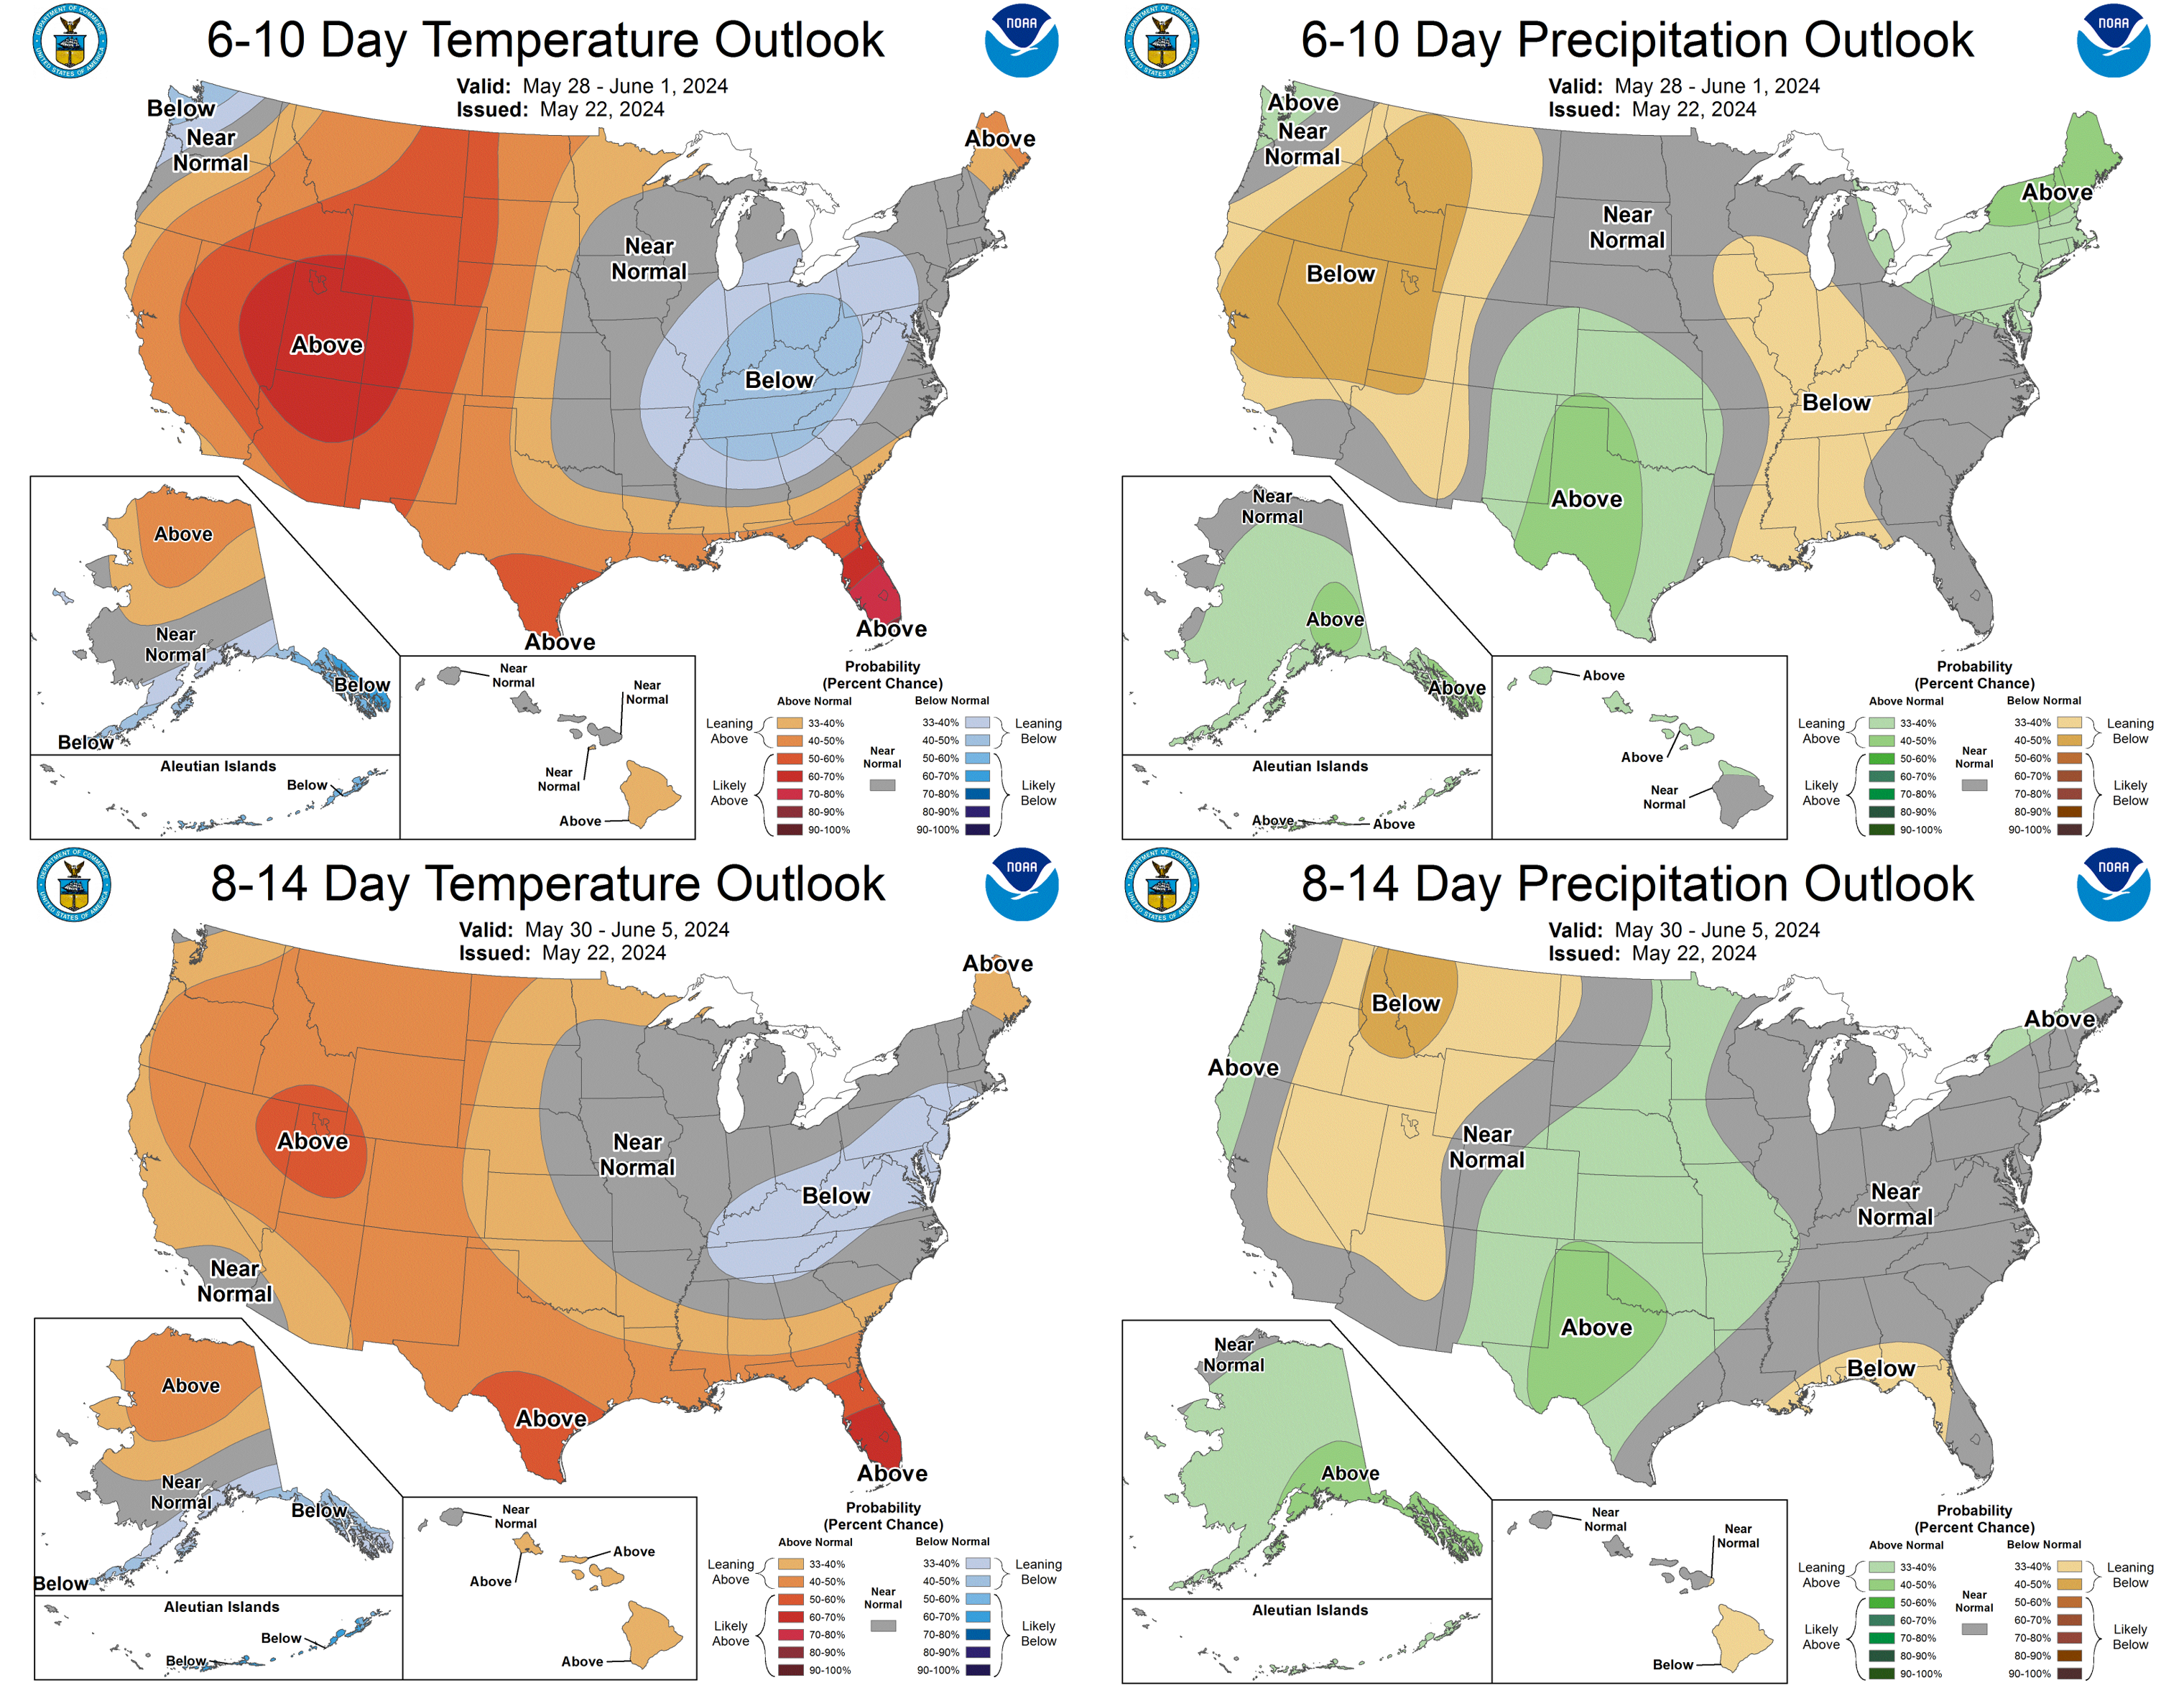 Map of the U.S. showing the 6-10 and 8-14 day outlook.